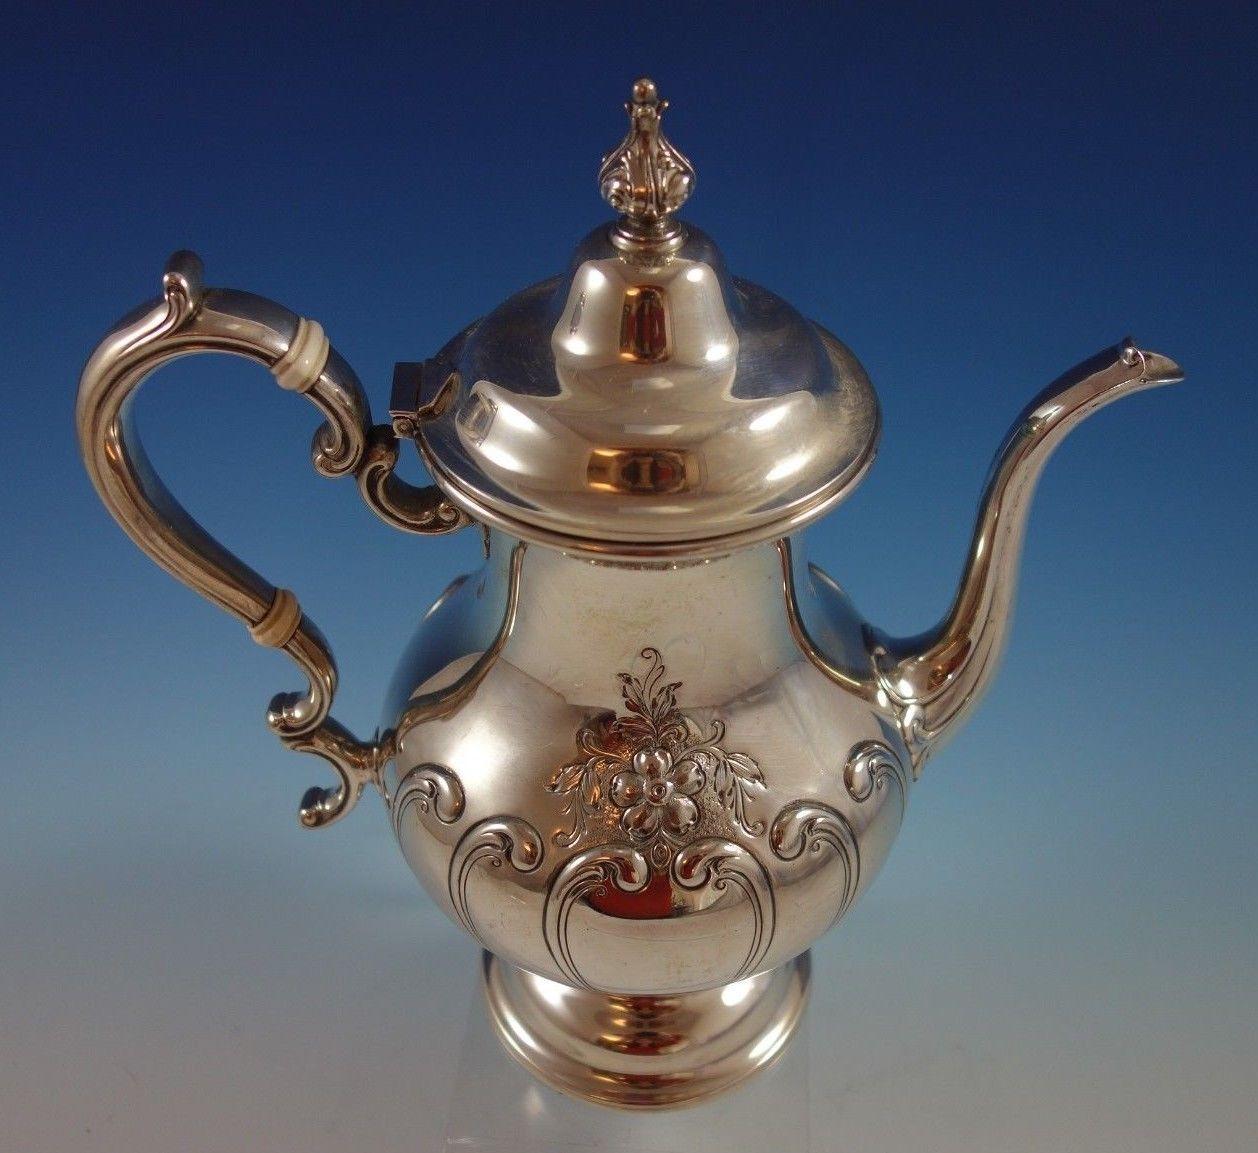 Beautiful Chantilly by Gorham Countess sterling silver coffee pot. It is beautifully hand chased and is marked #1001-2. The coffee pot measures 10 1/2 tall x 9 1/2 and weighs 30.7 troy ounces. It is not monogrammed and is in excellent condition.